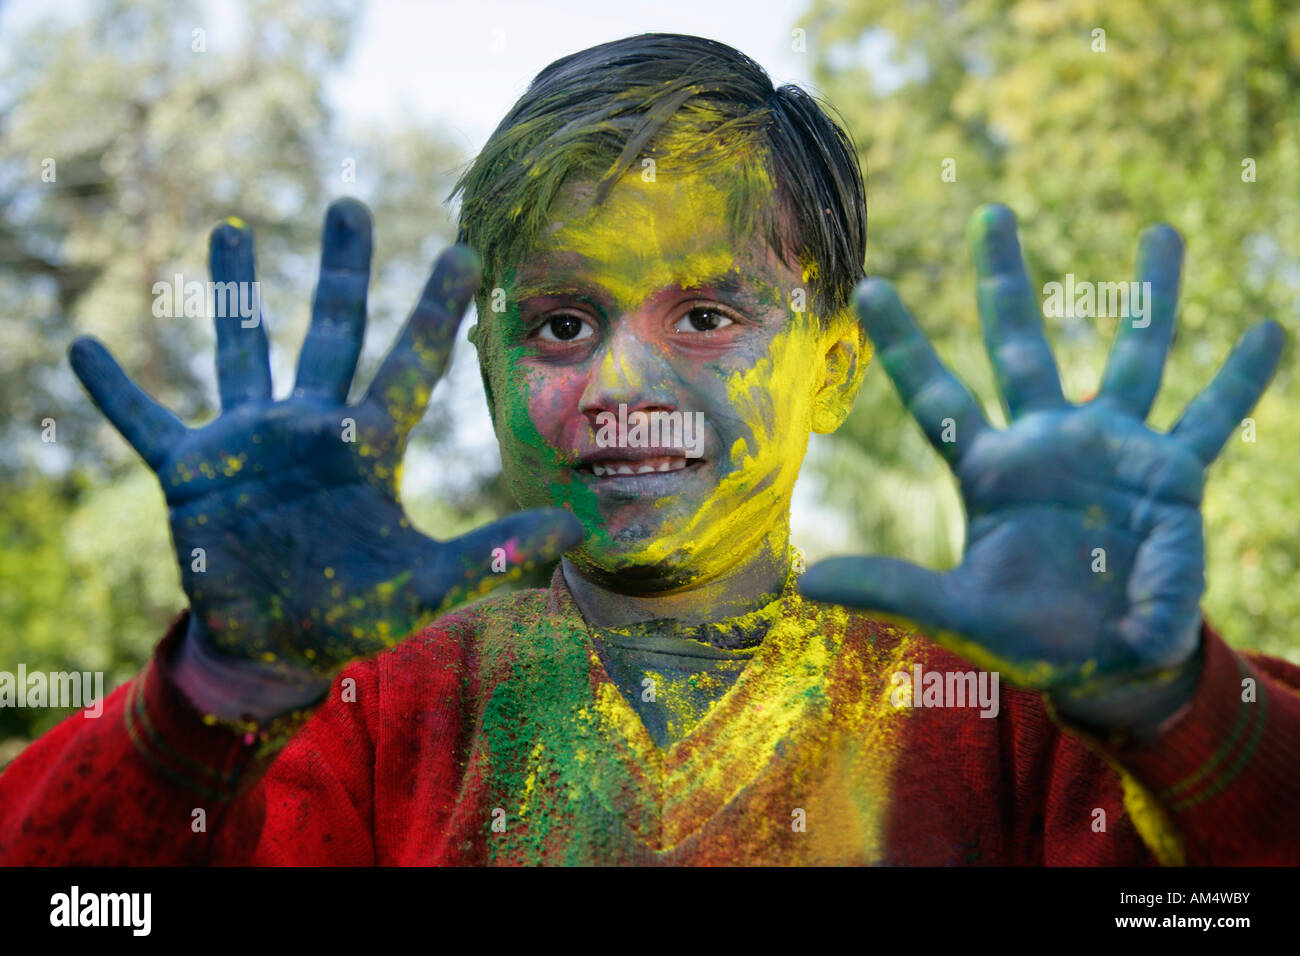 A smiling young boy shows off his colored hands and face during festival of Holi in India. Stock Photo